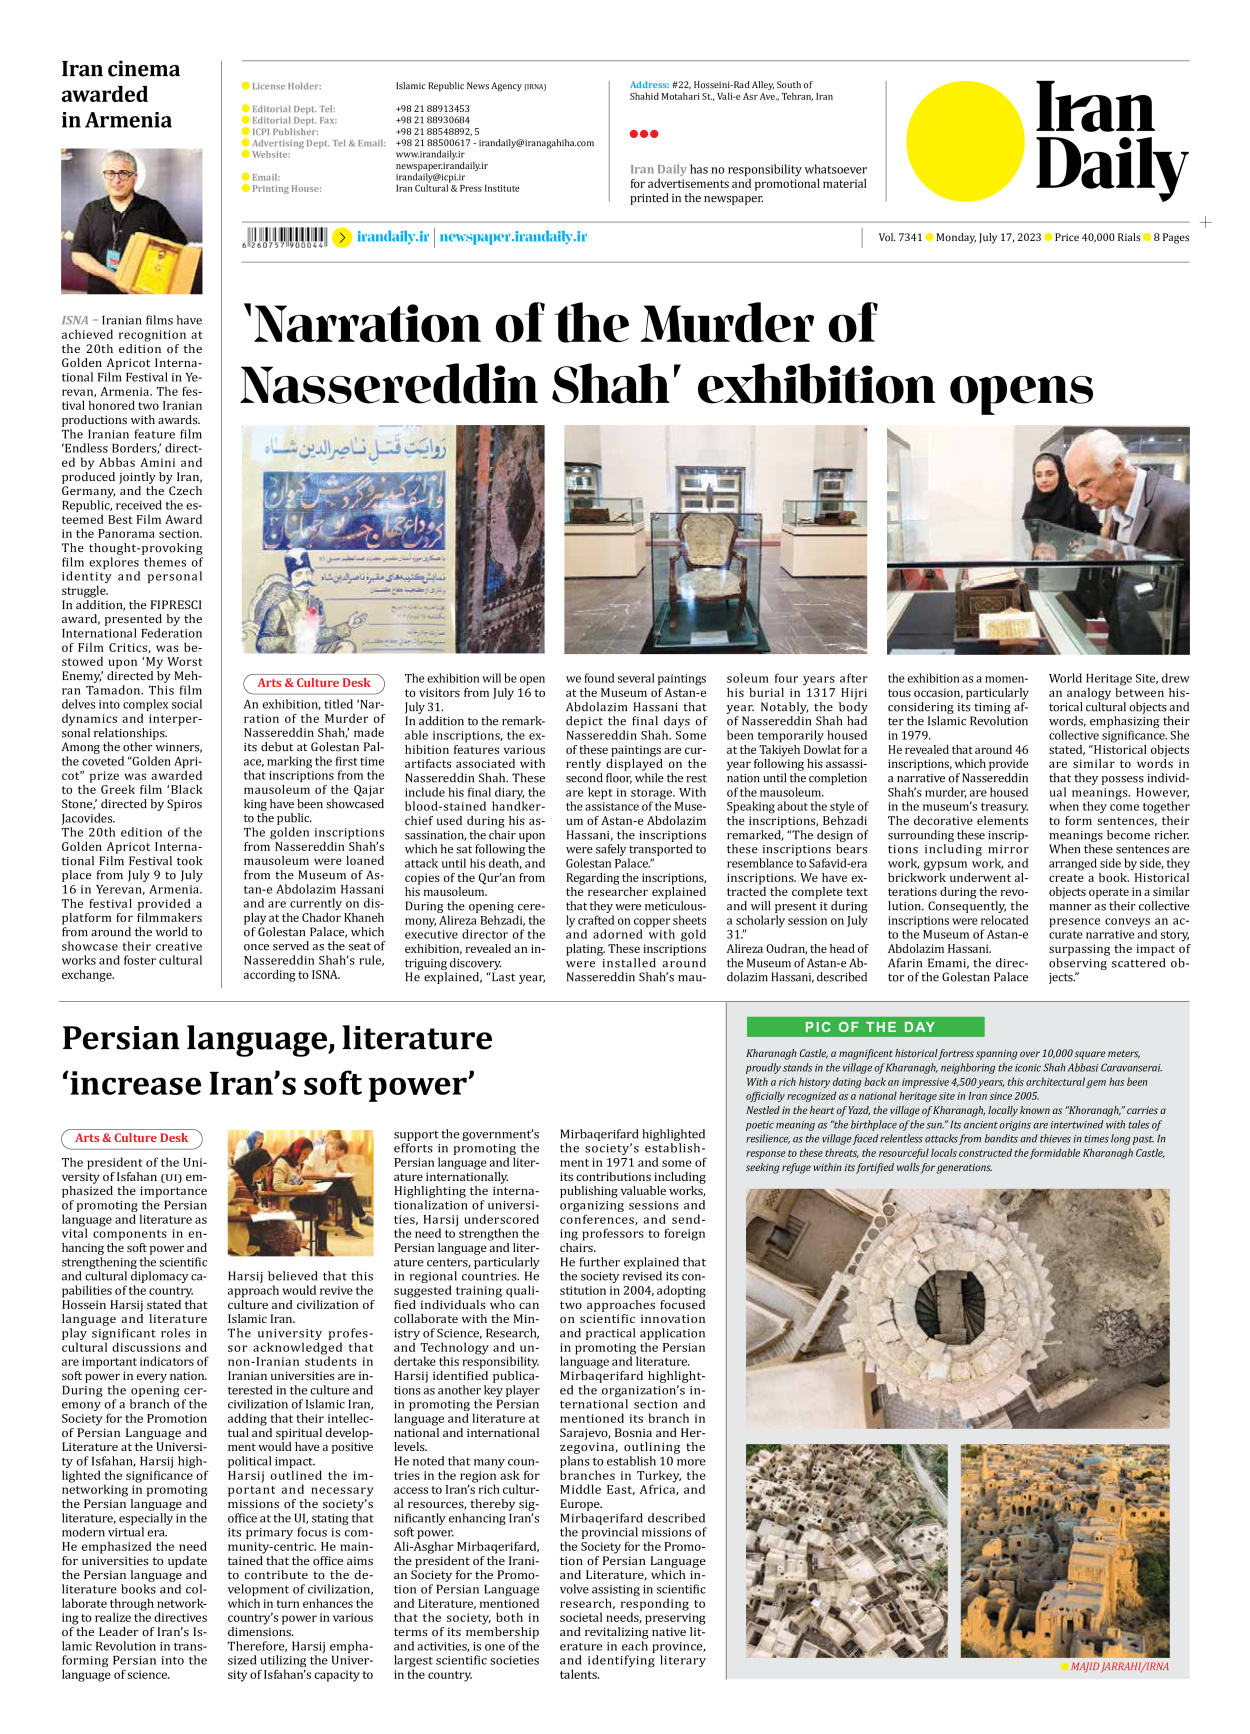 Iran Daily - Number Seven Thousand Three Hundred and Forty One - 17 July 2023 - Page 8